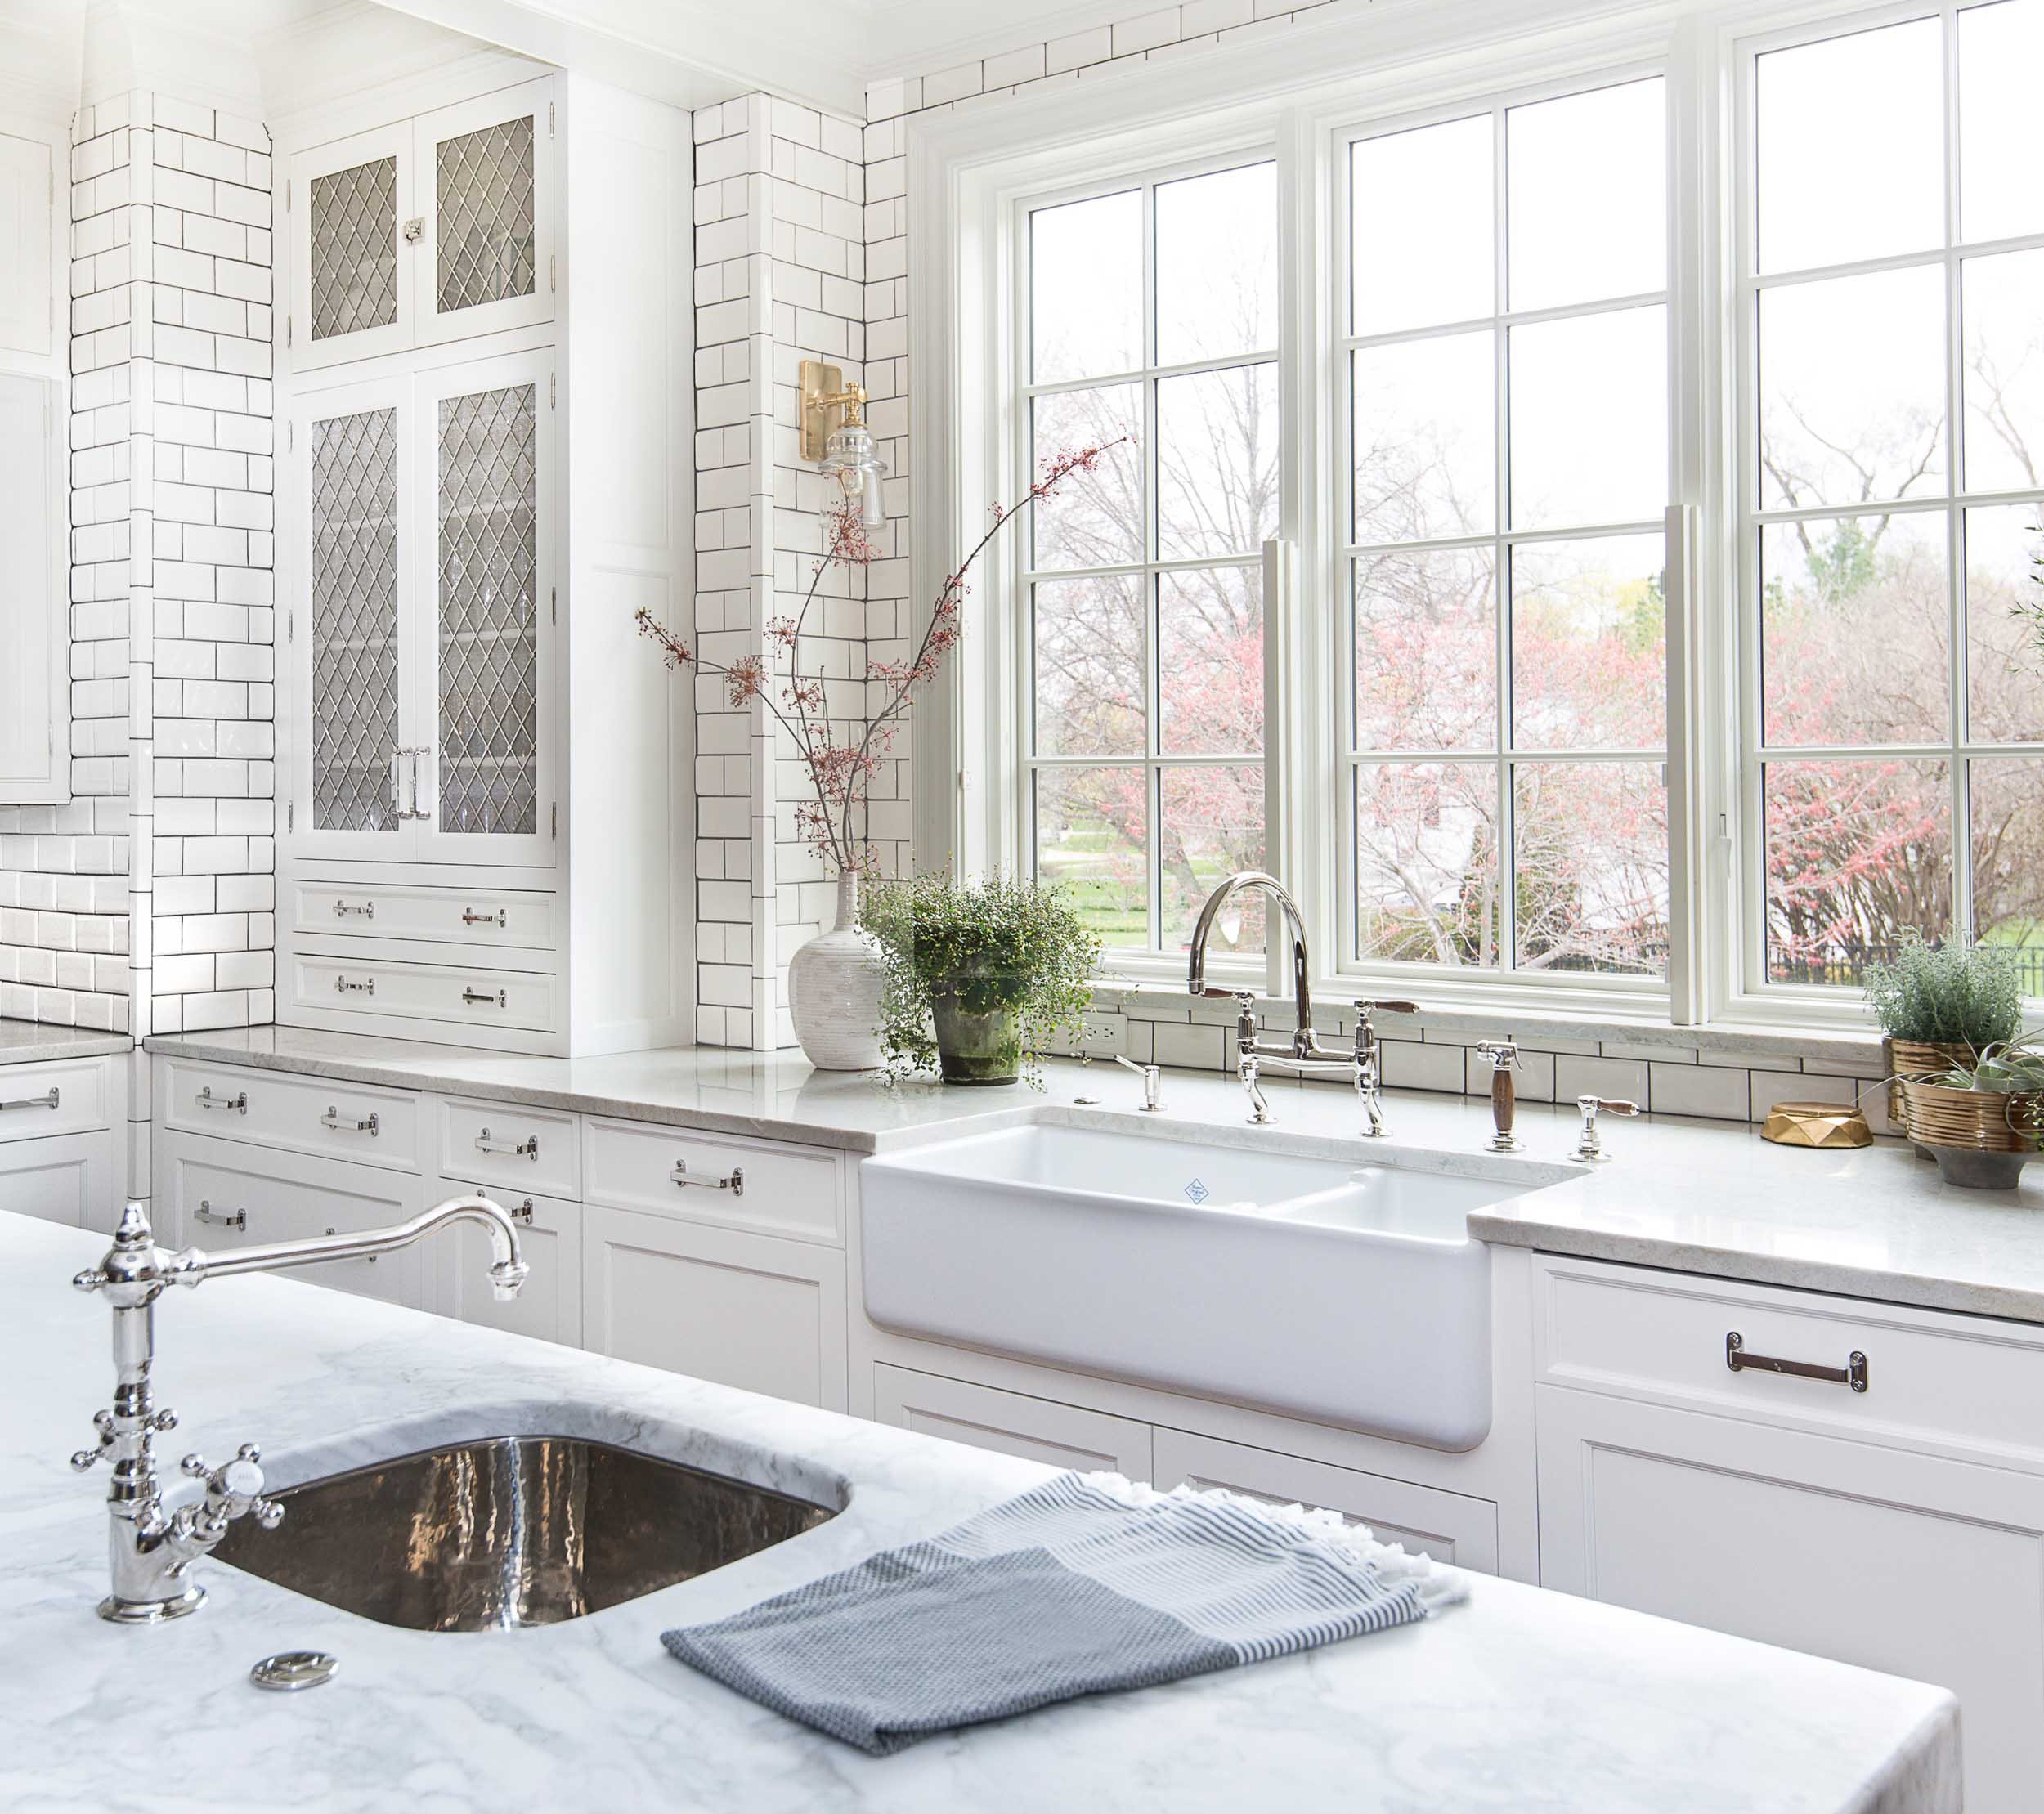 shiny sparkling white kitchen with subway tiles, white marble countertops and custom cabinetry